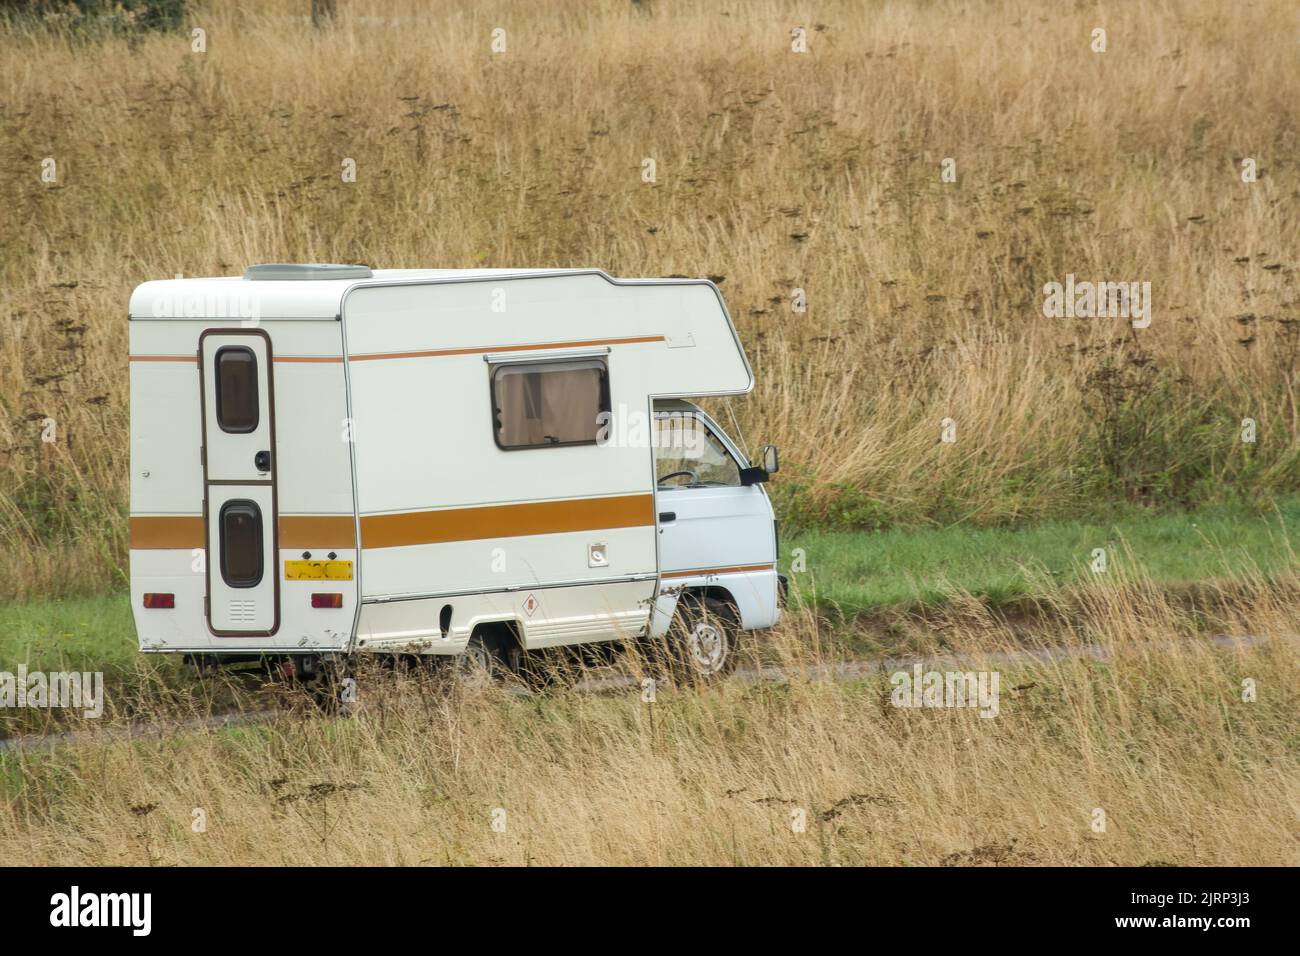 Vauxhall Bedford Rascal 1991 Nipper, 3 Berth, Overcab bed Campervan driving through parched summer countryside Stock Photo